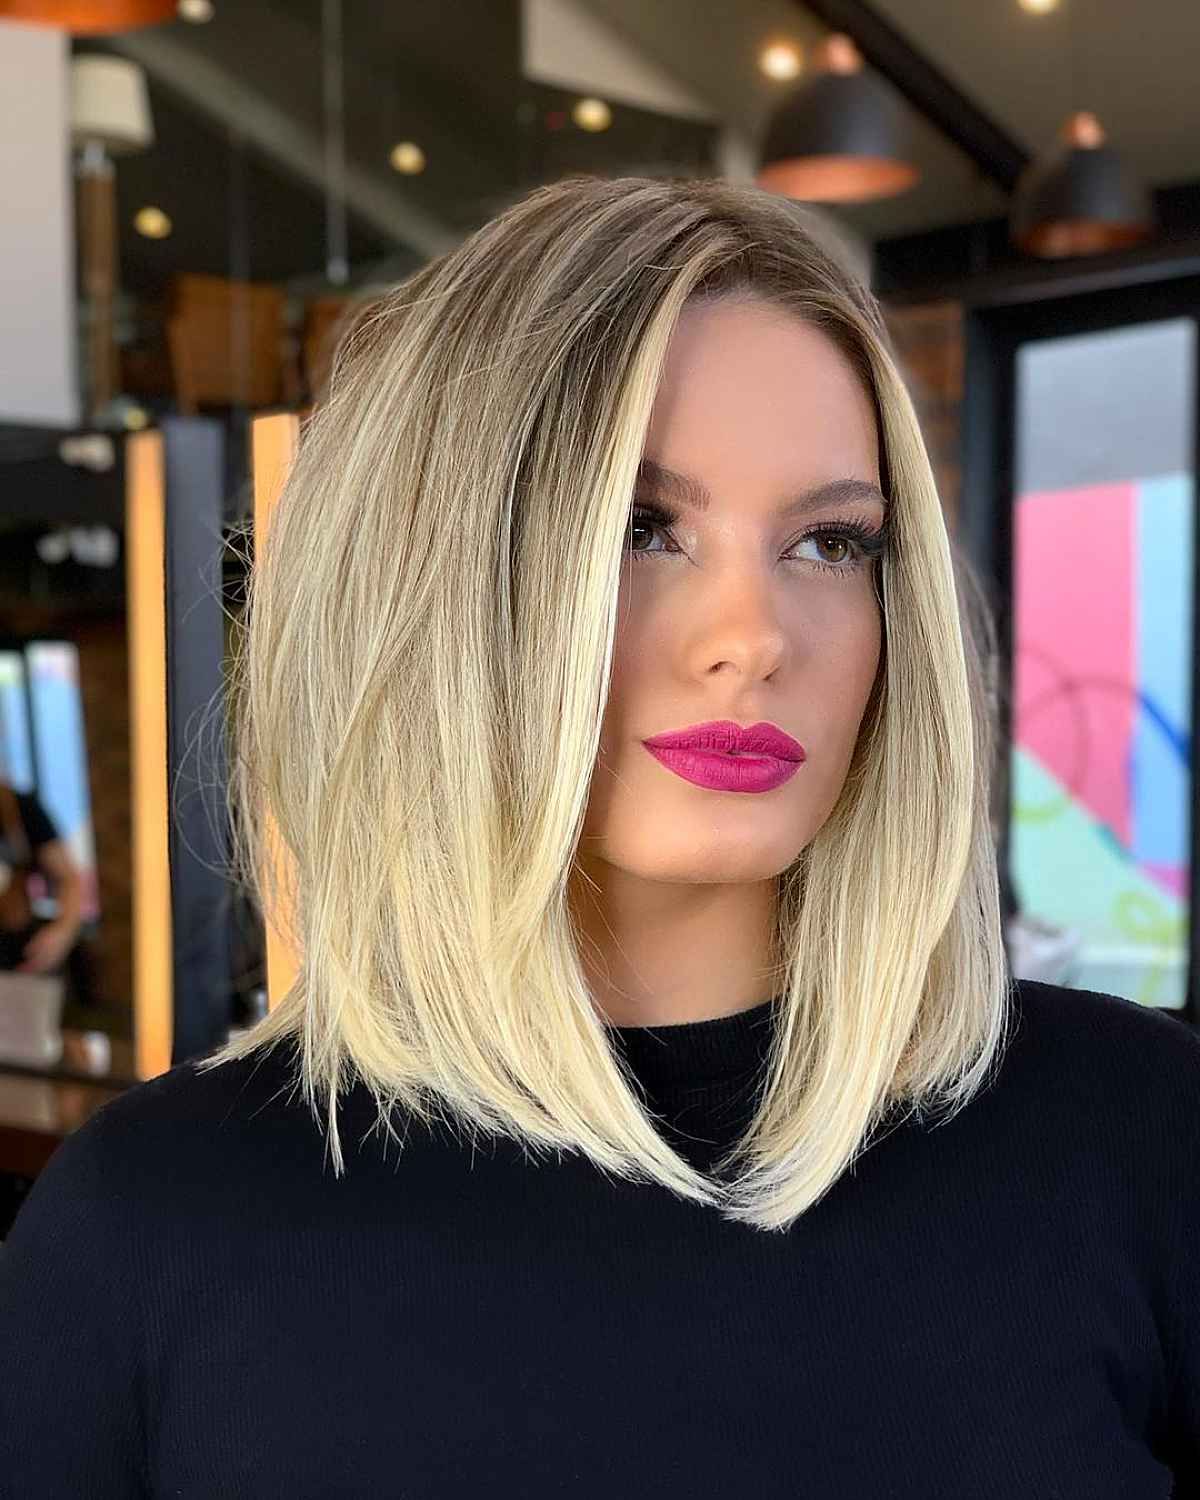 33 Best Long Layered Bob (layered Lob) Hairstyles In 2022 Inside 2017 Lob Haircuts With Swoopy Face Framing Layers (View 2 of 20)